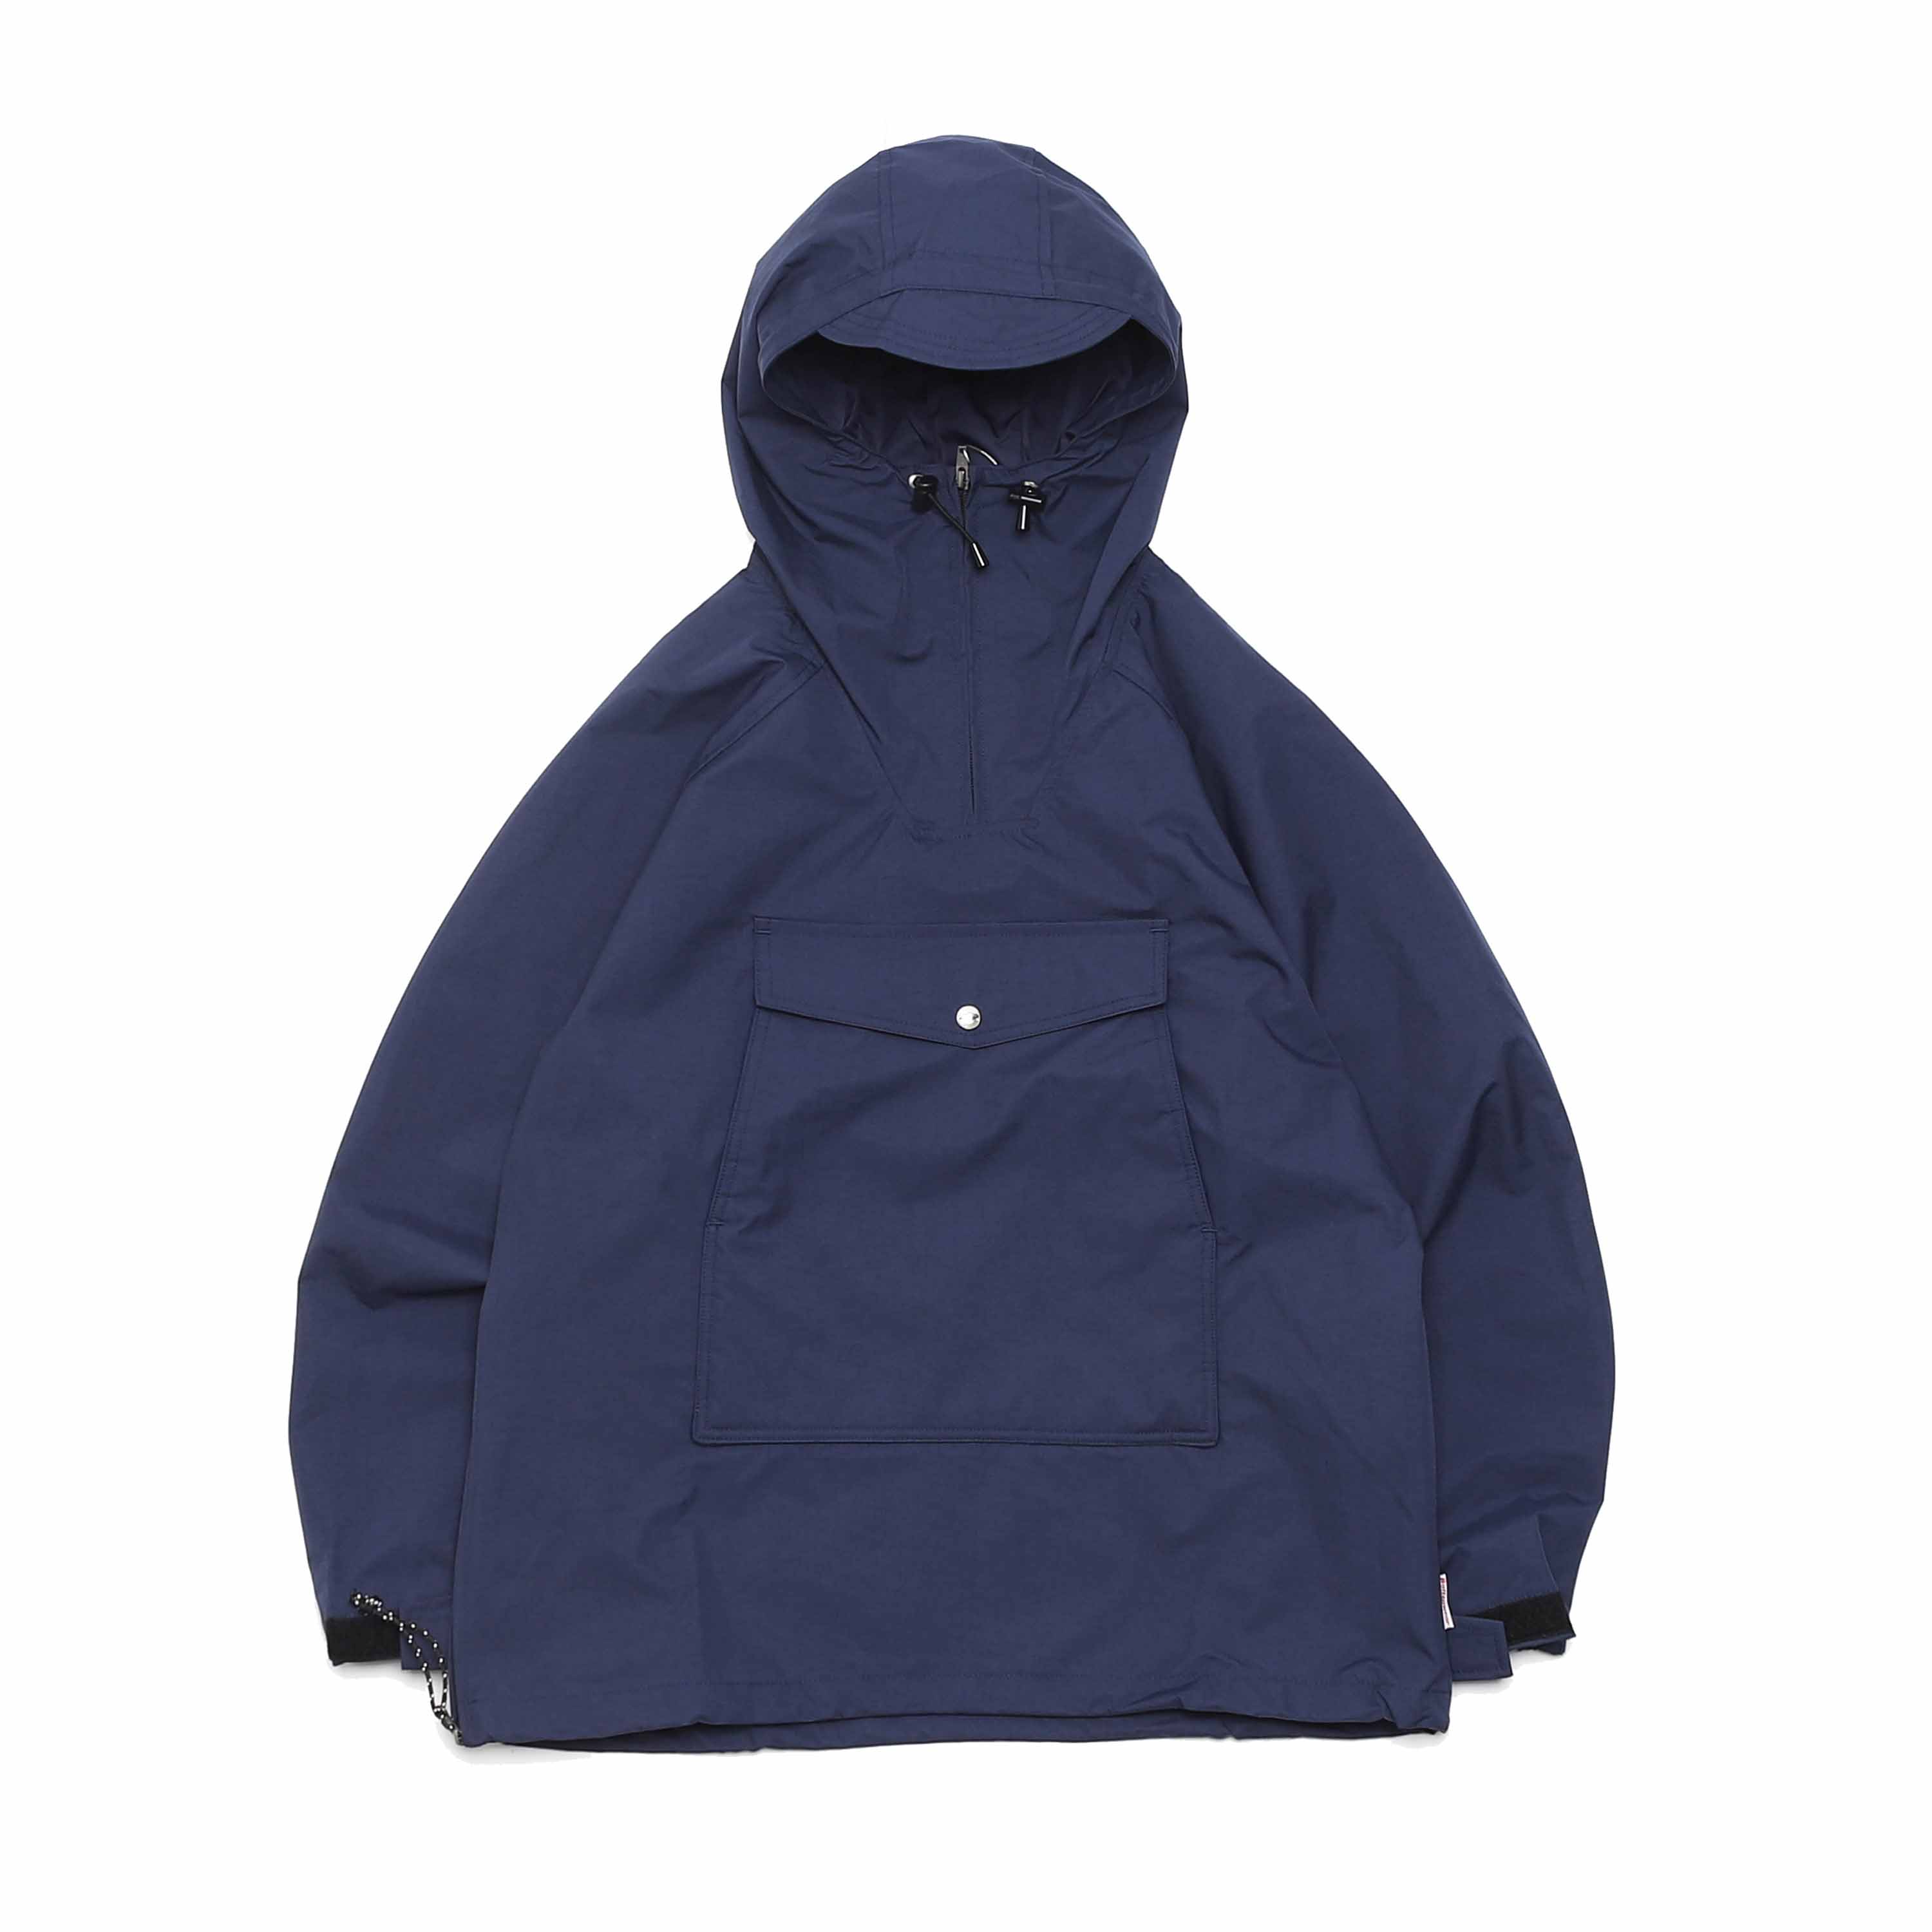 SCOUT ANORAK - NAVY